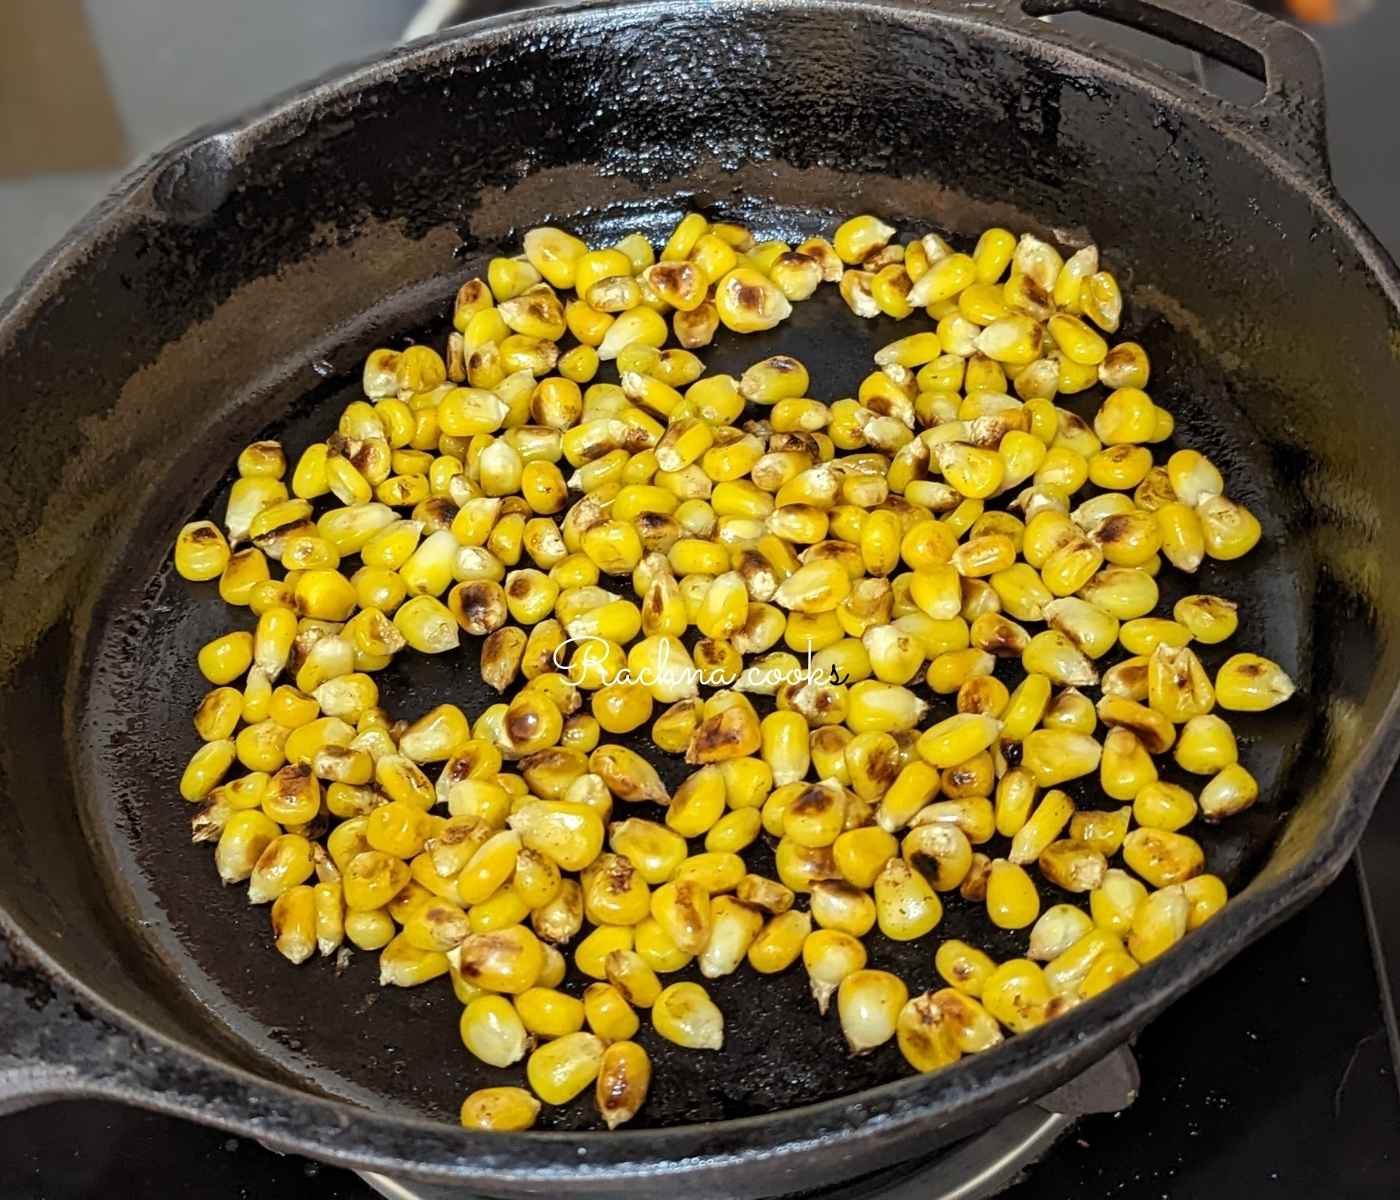 Skillet corn nicely charred